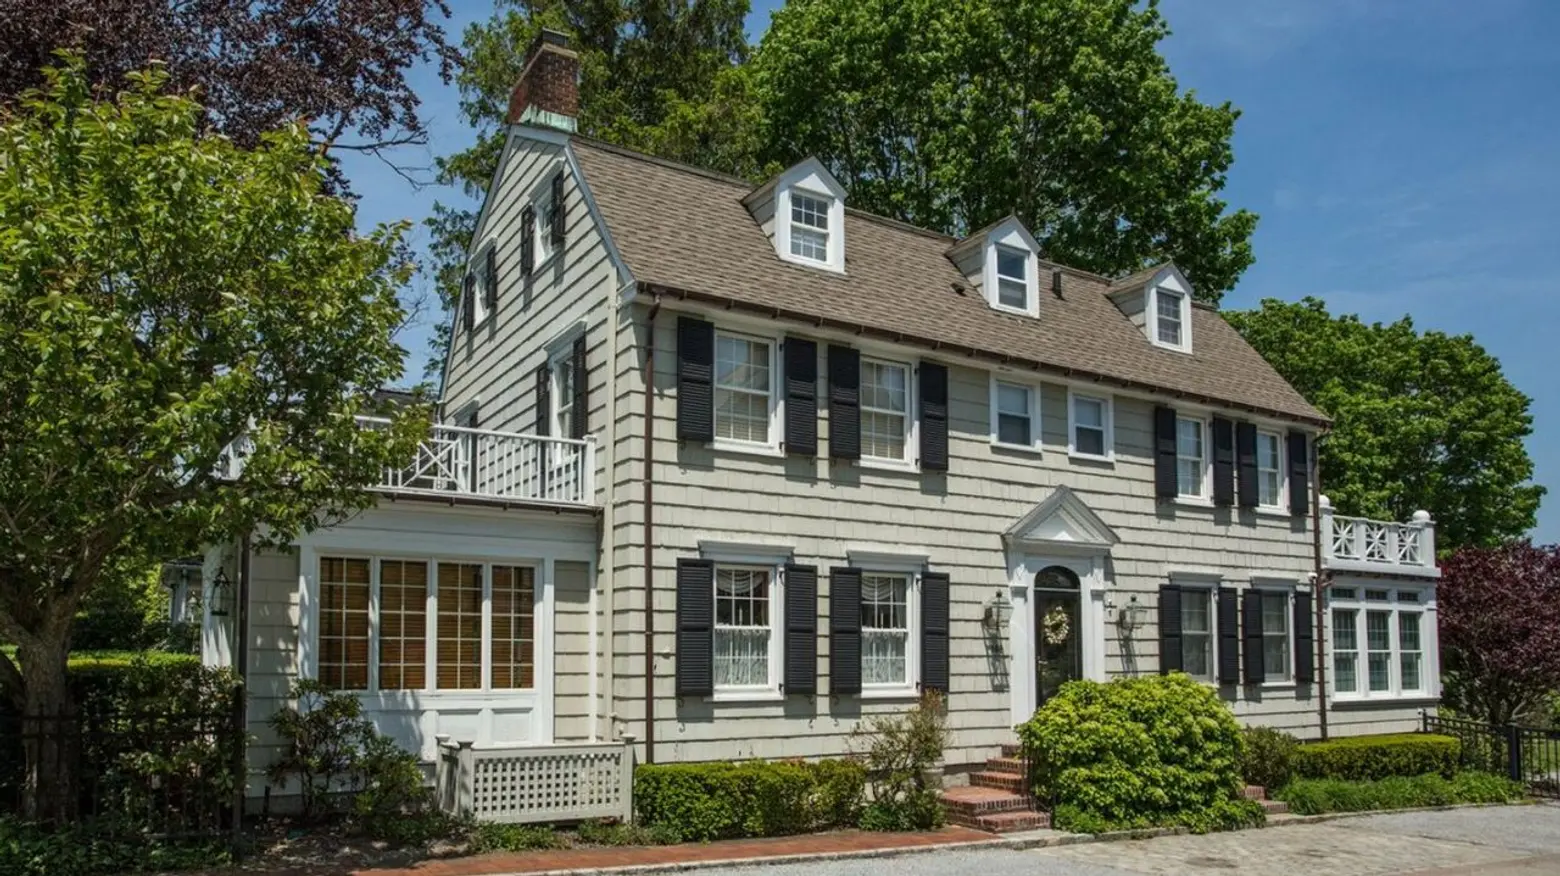 Long Island’s ‘Amityville Horror’ house finds a brave buyer